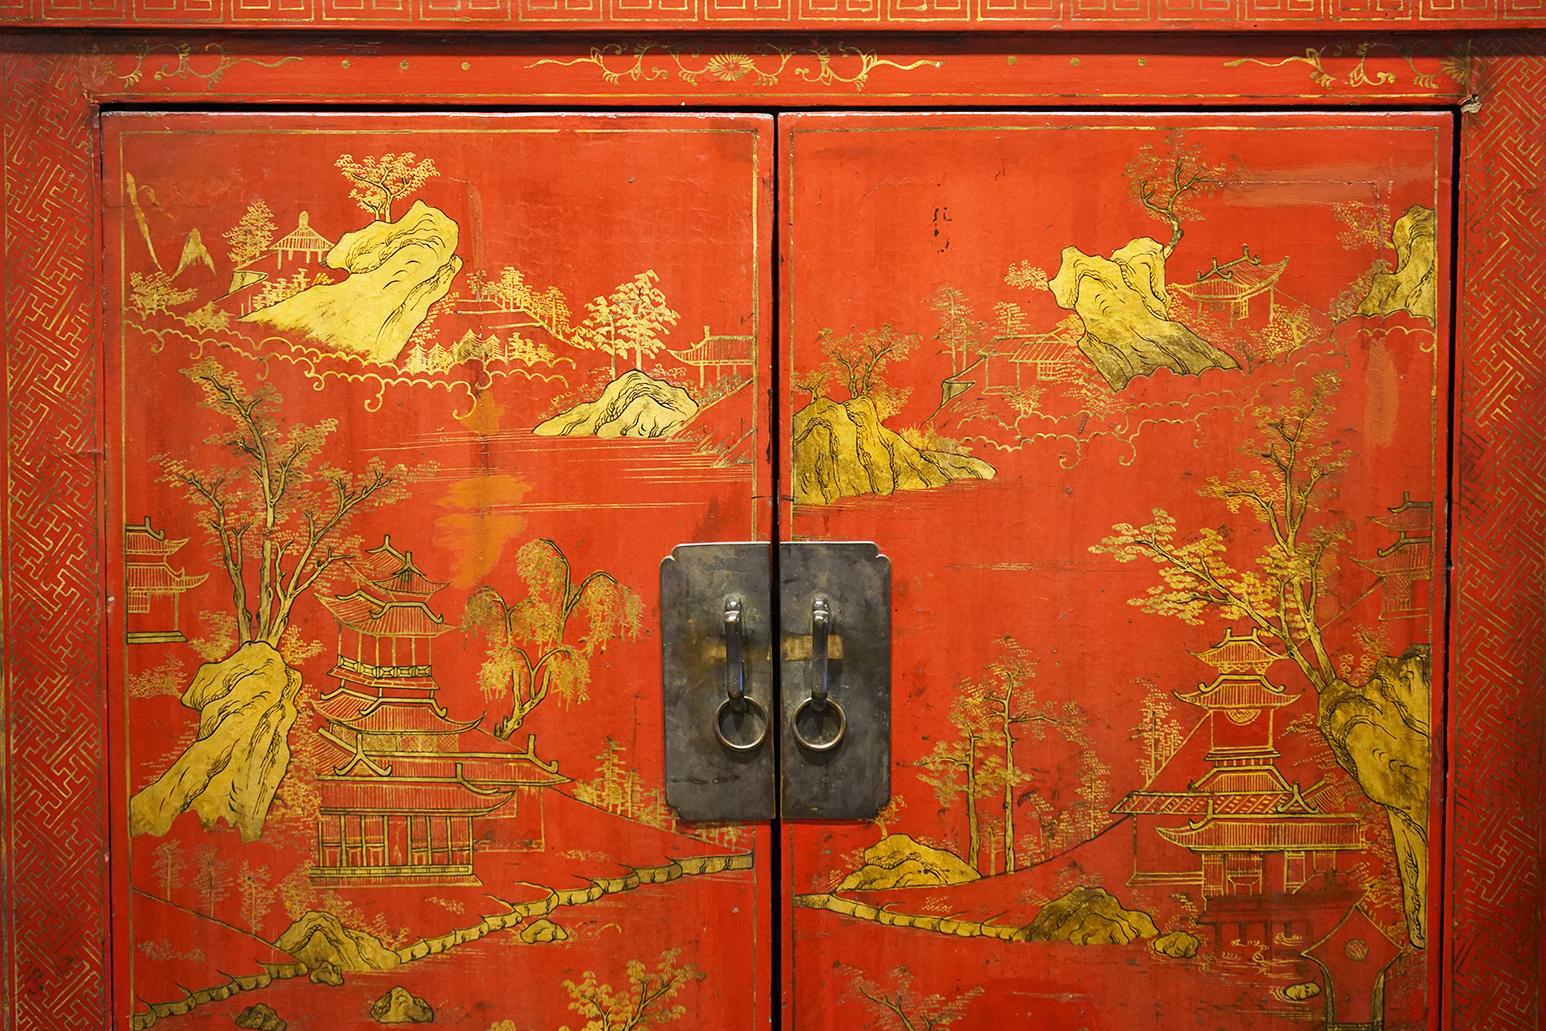 This late 19th century red lacquer and gilt decoration two door wedding cabinet has a wonderful warm patina. The doors are decorated with rocky landscapes, trees, temples and birds. The side panels are decorated with more formal cartouches. The